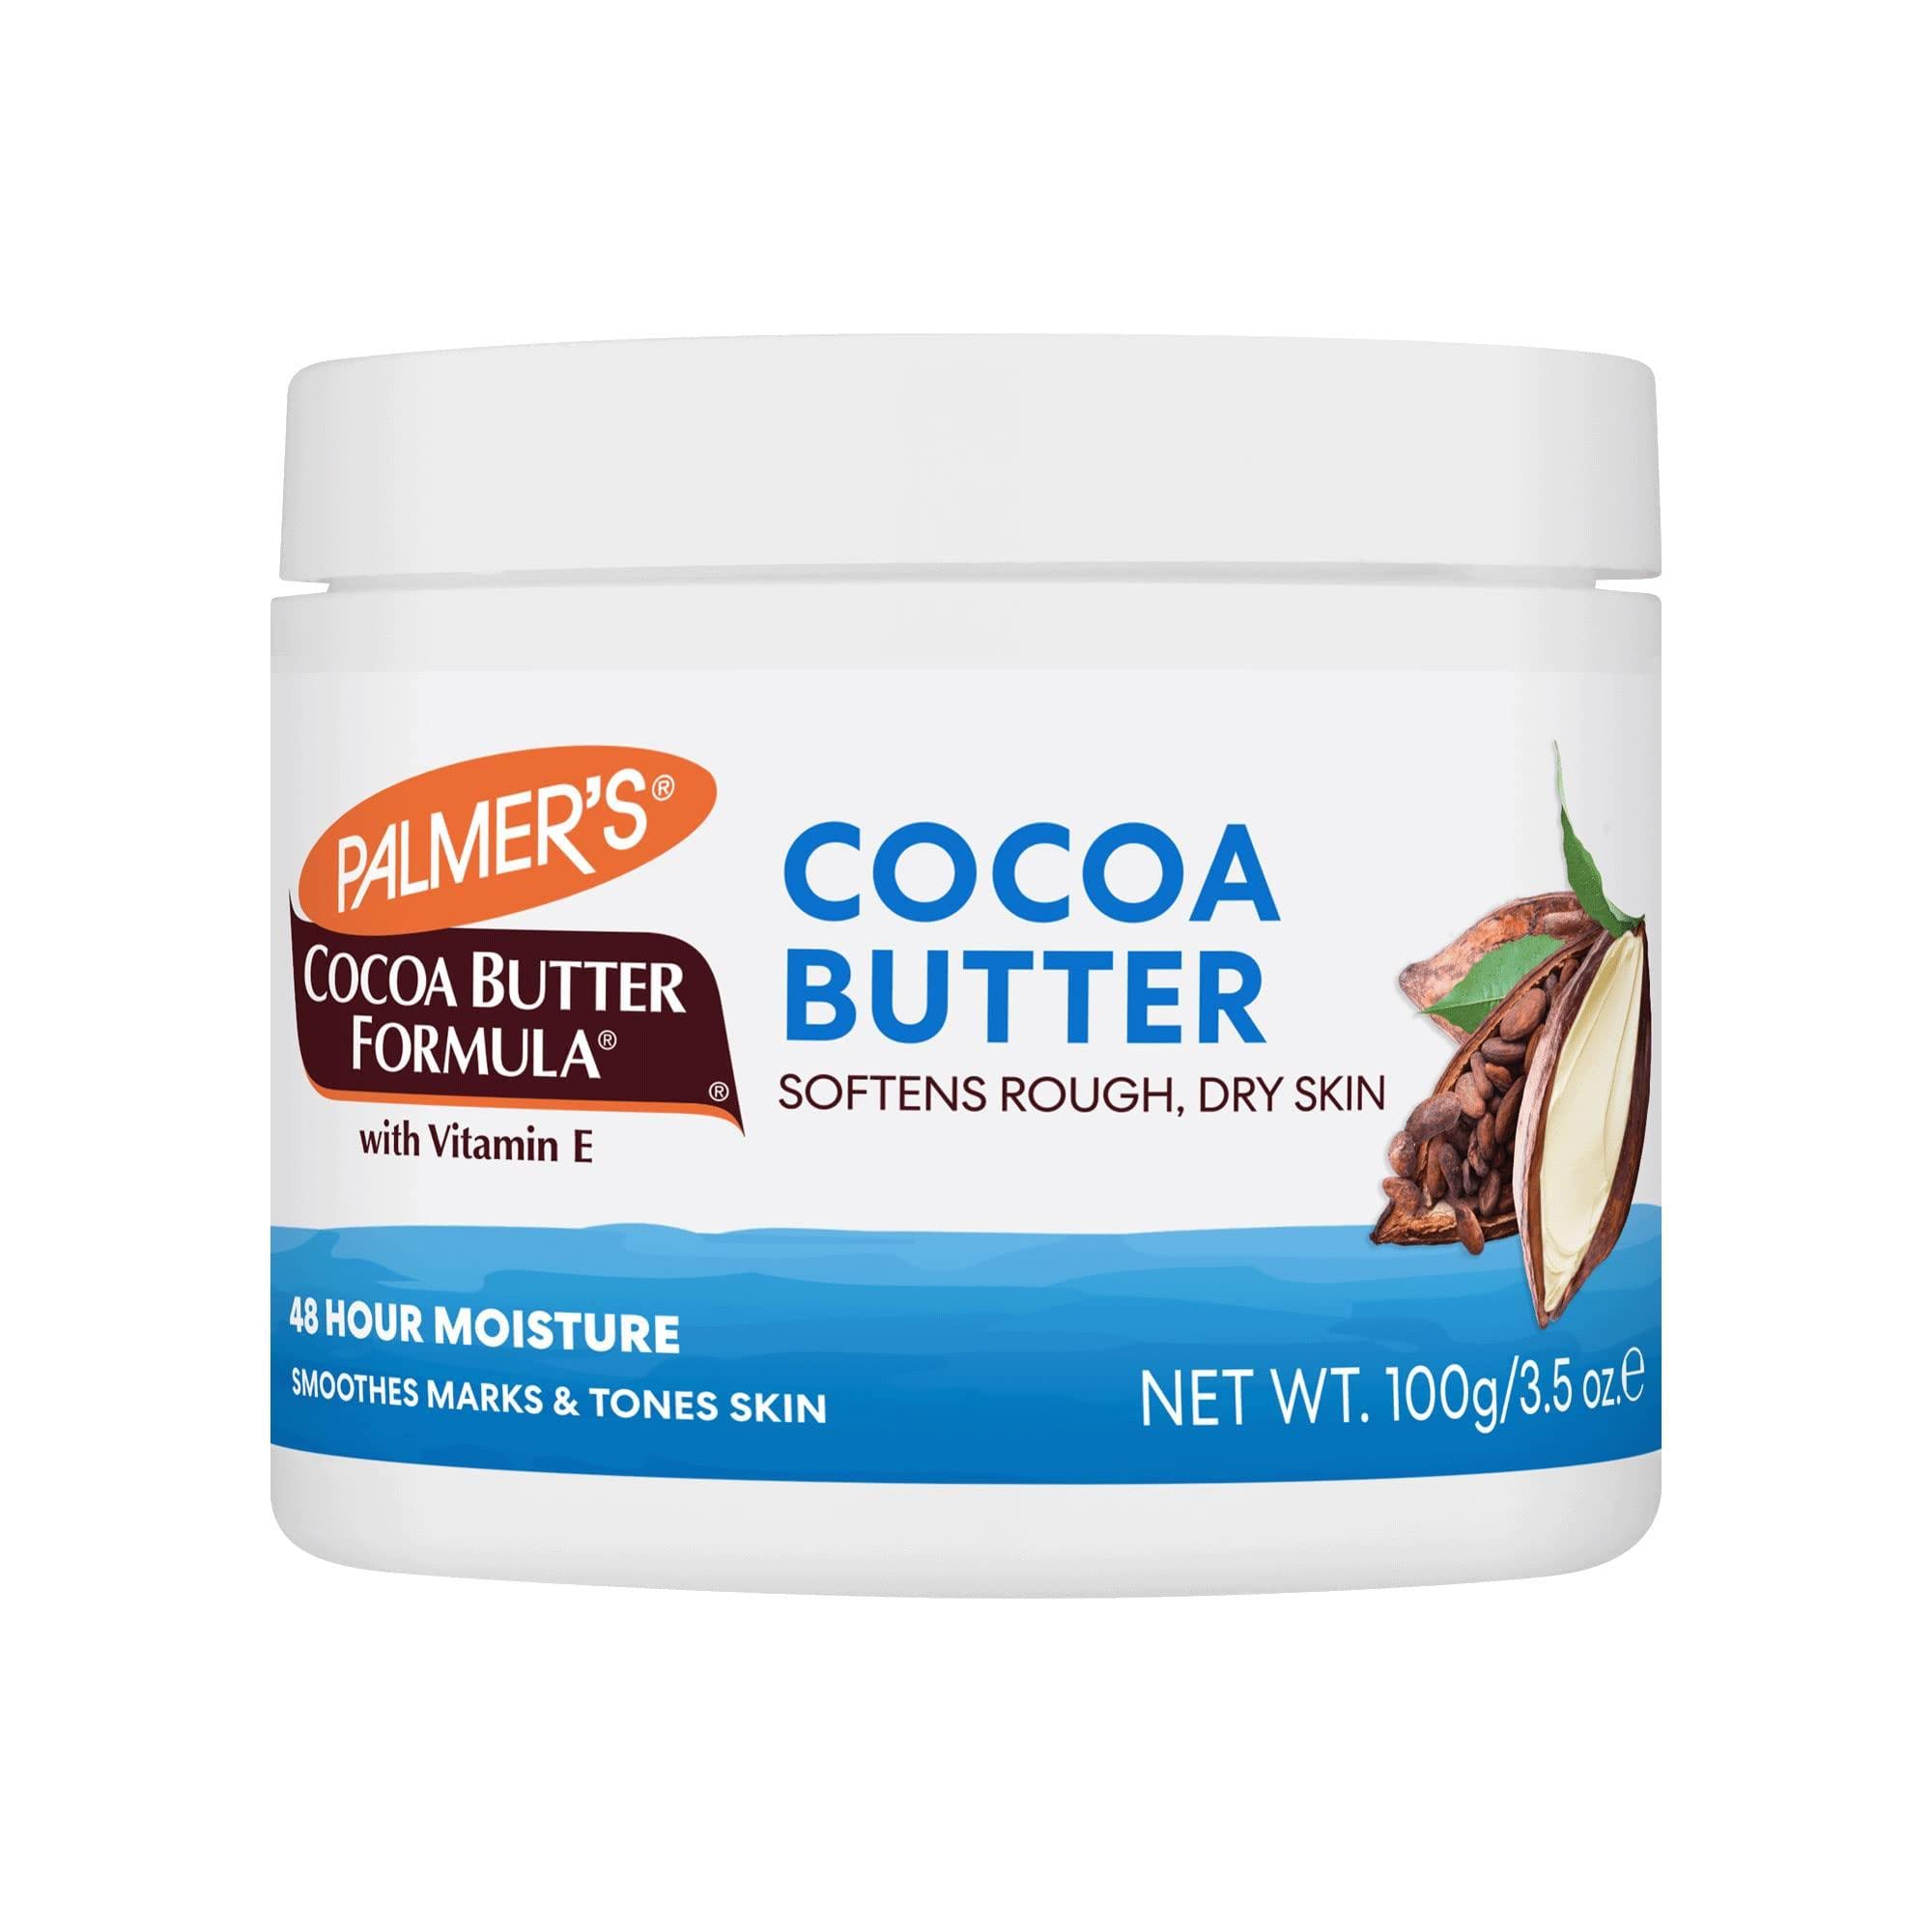 COCOA BUTTER SOFTENS ROUGH,DRY SKIN 100G